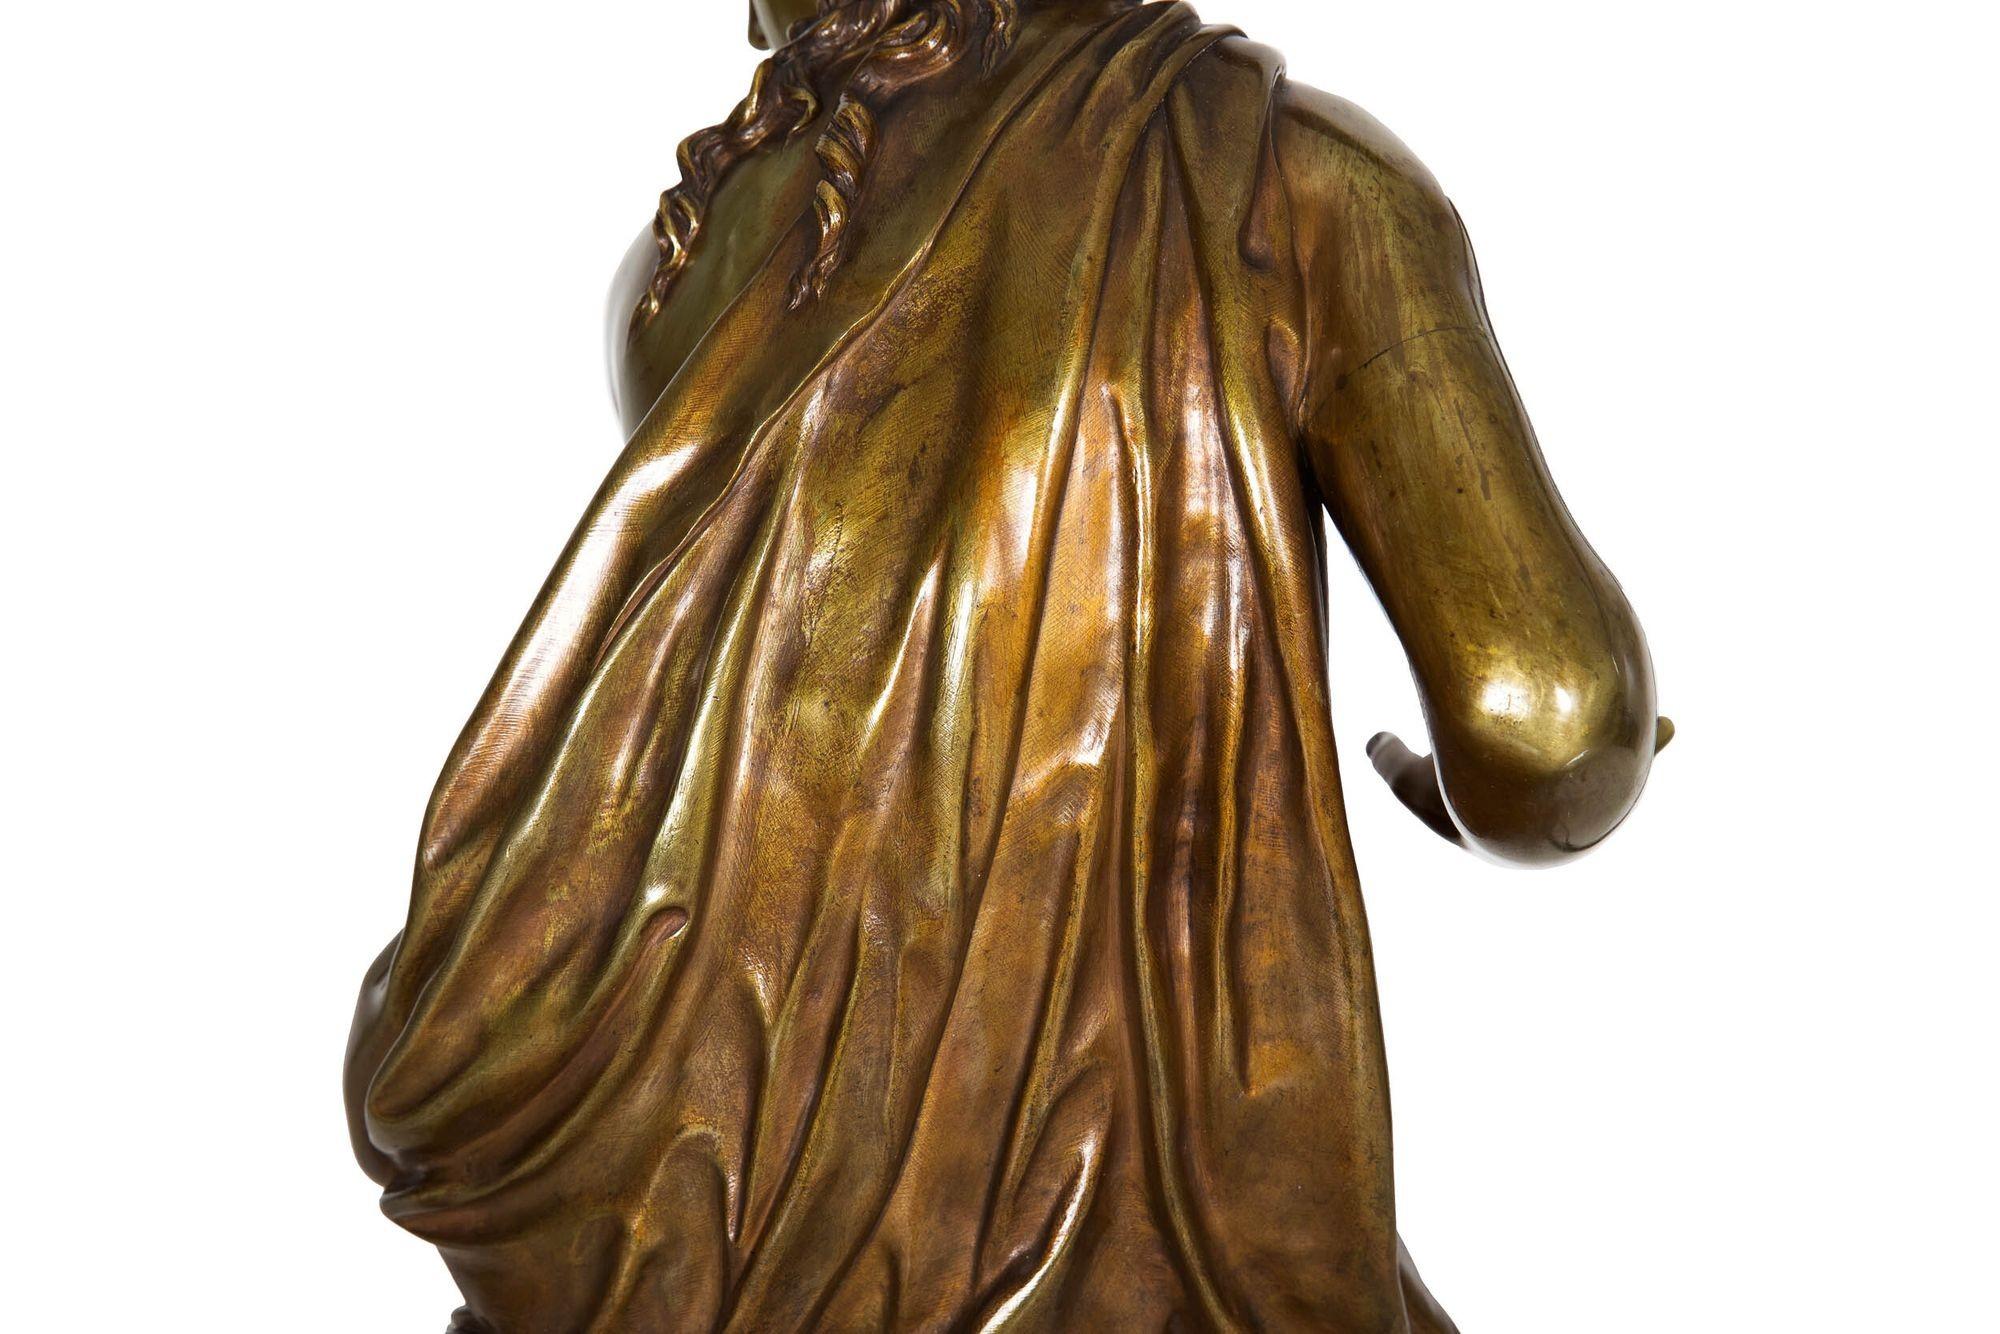 French Antique Bronze Sculpture “Seated Woman” by Etienne-Henri Dumaige, c.1880 For Sale 12